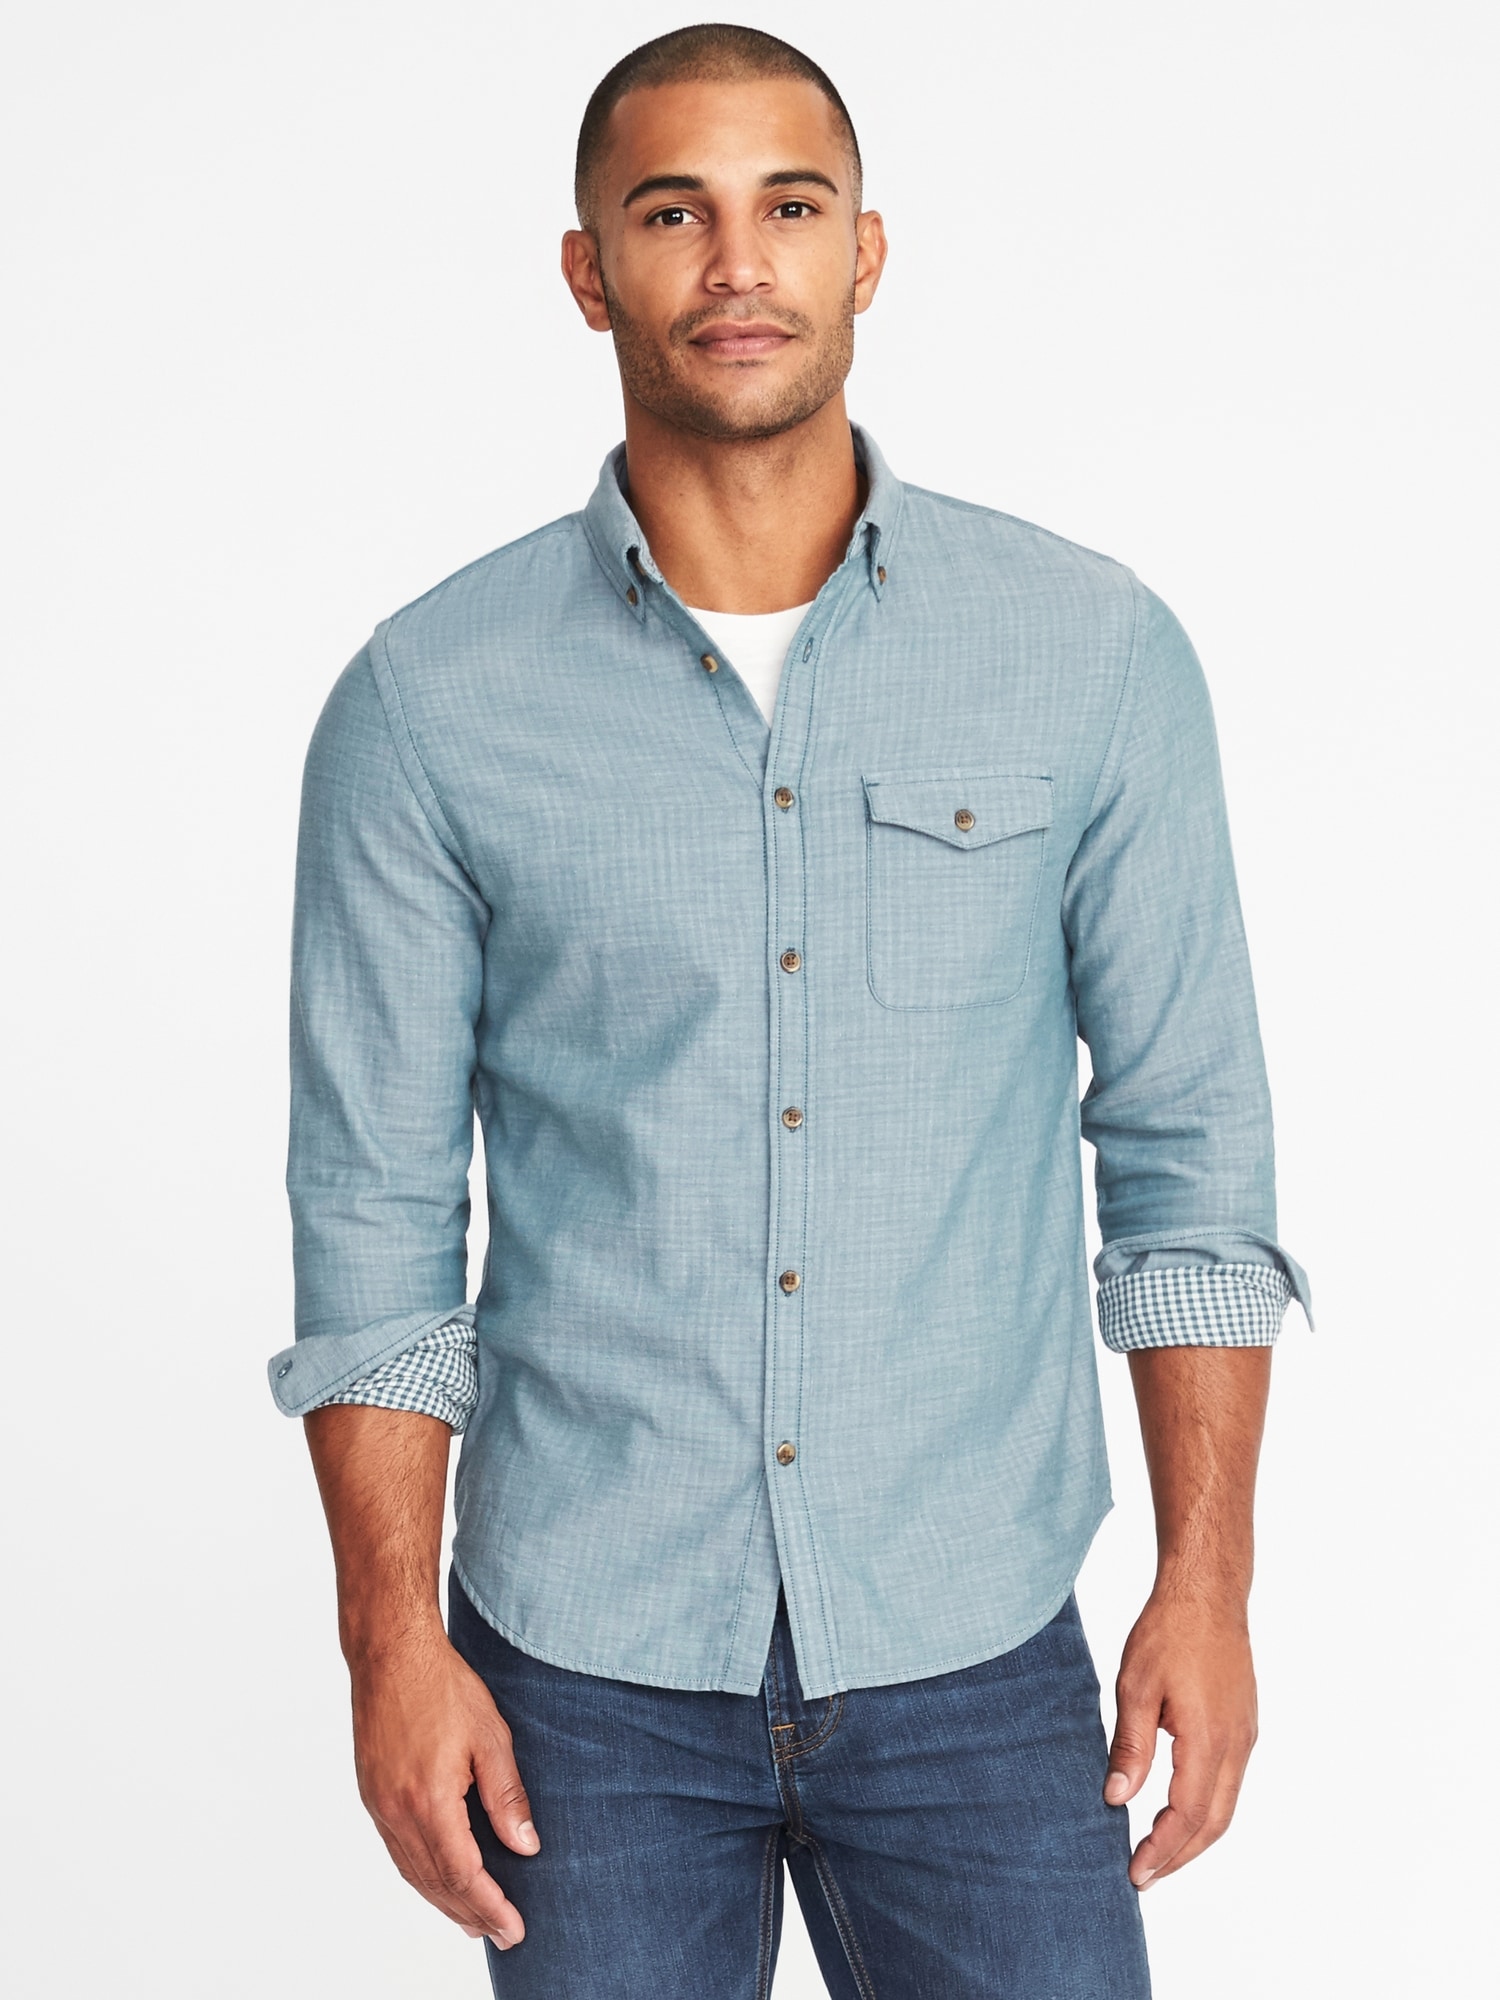 Slim-Fit Double-Weave Shirt for Men | Old Navy